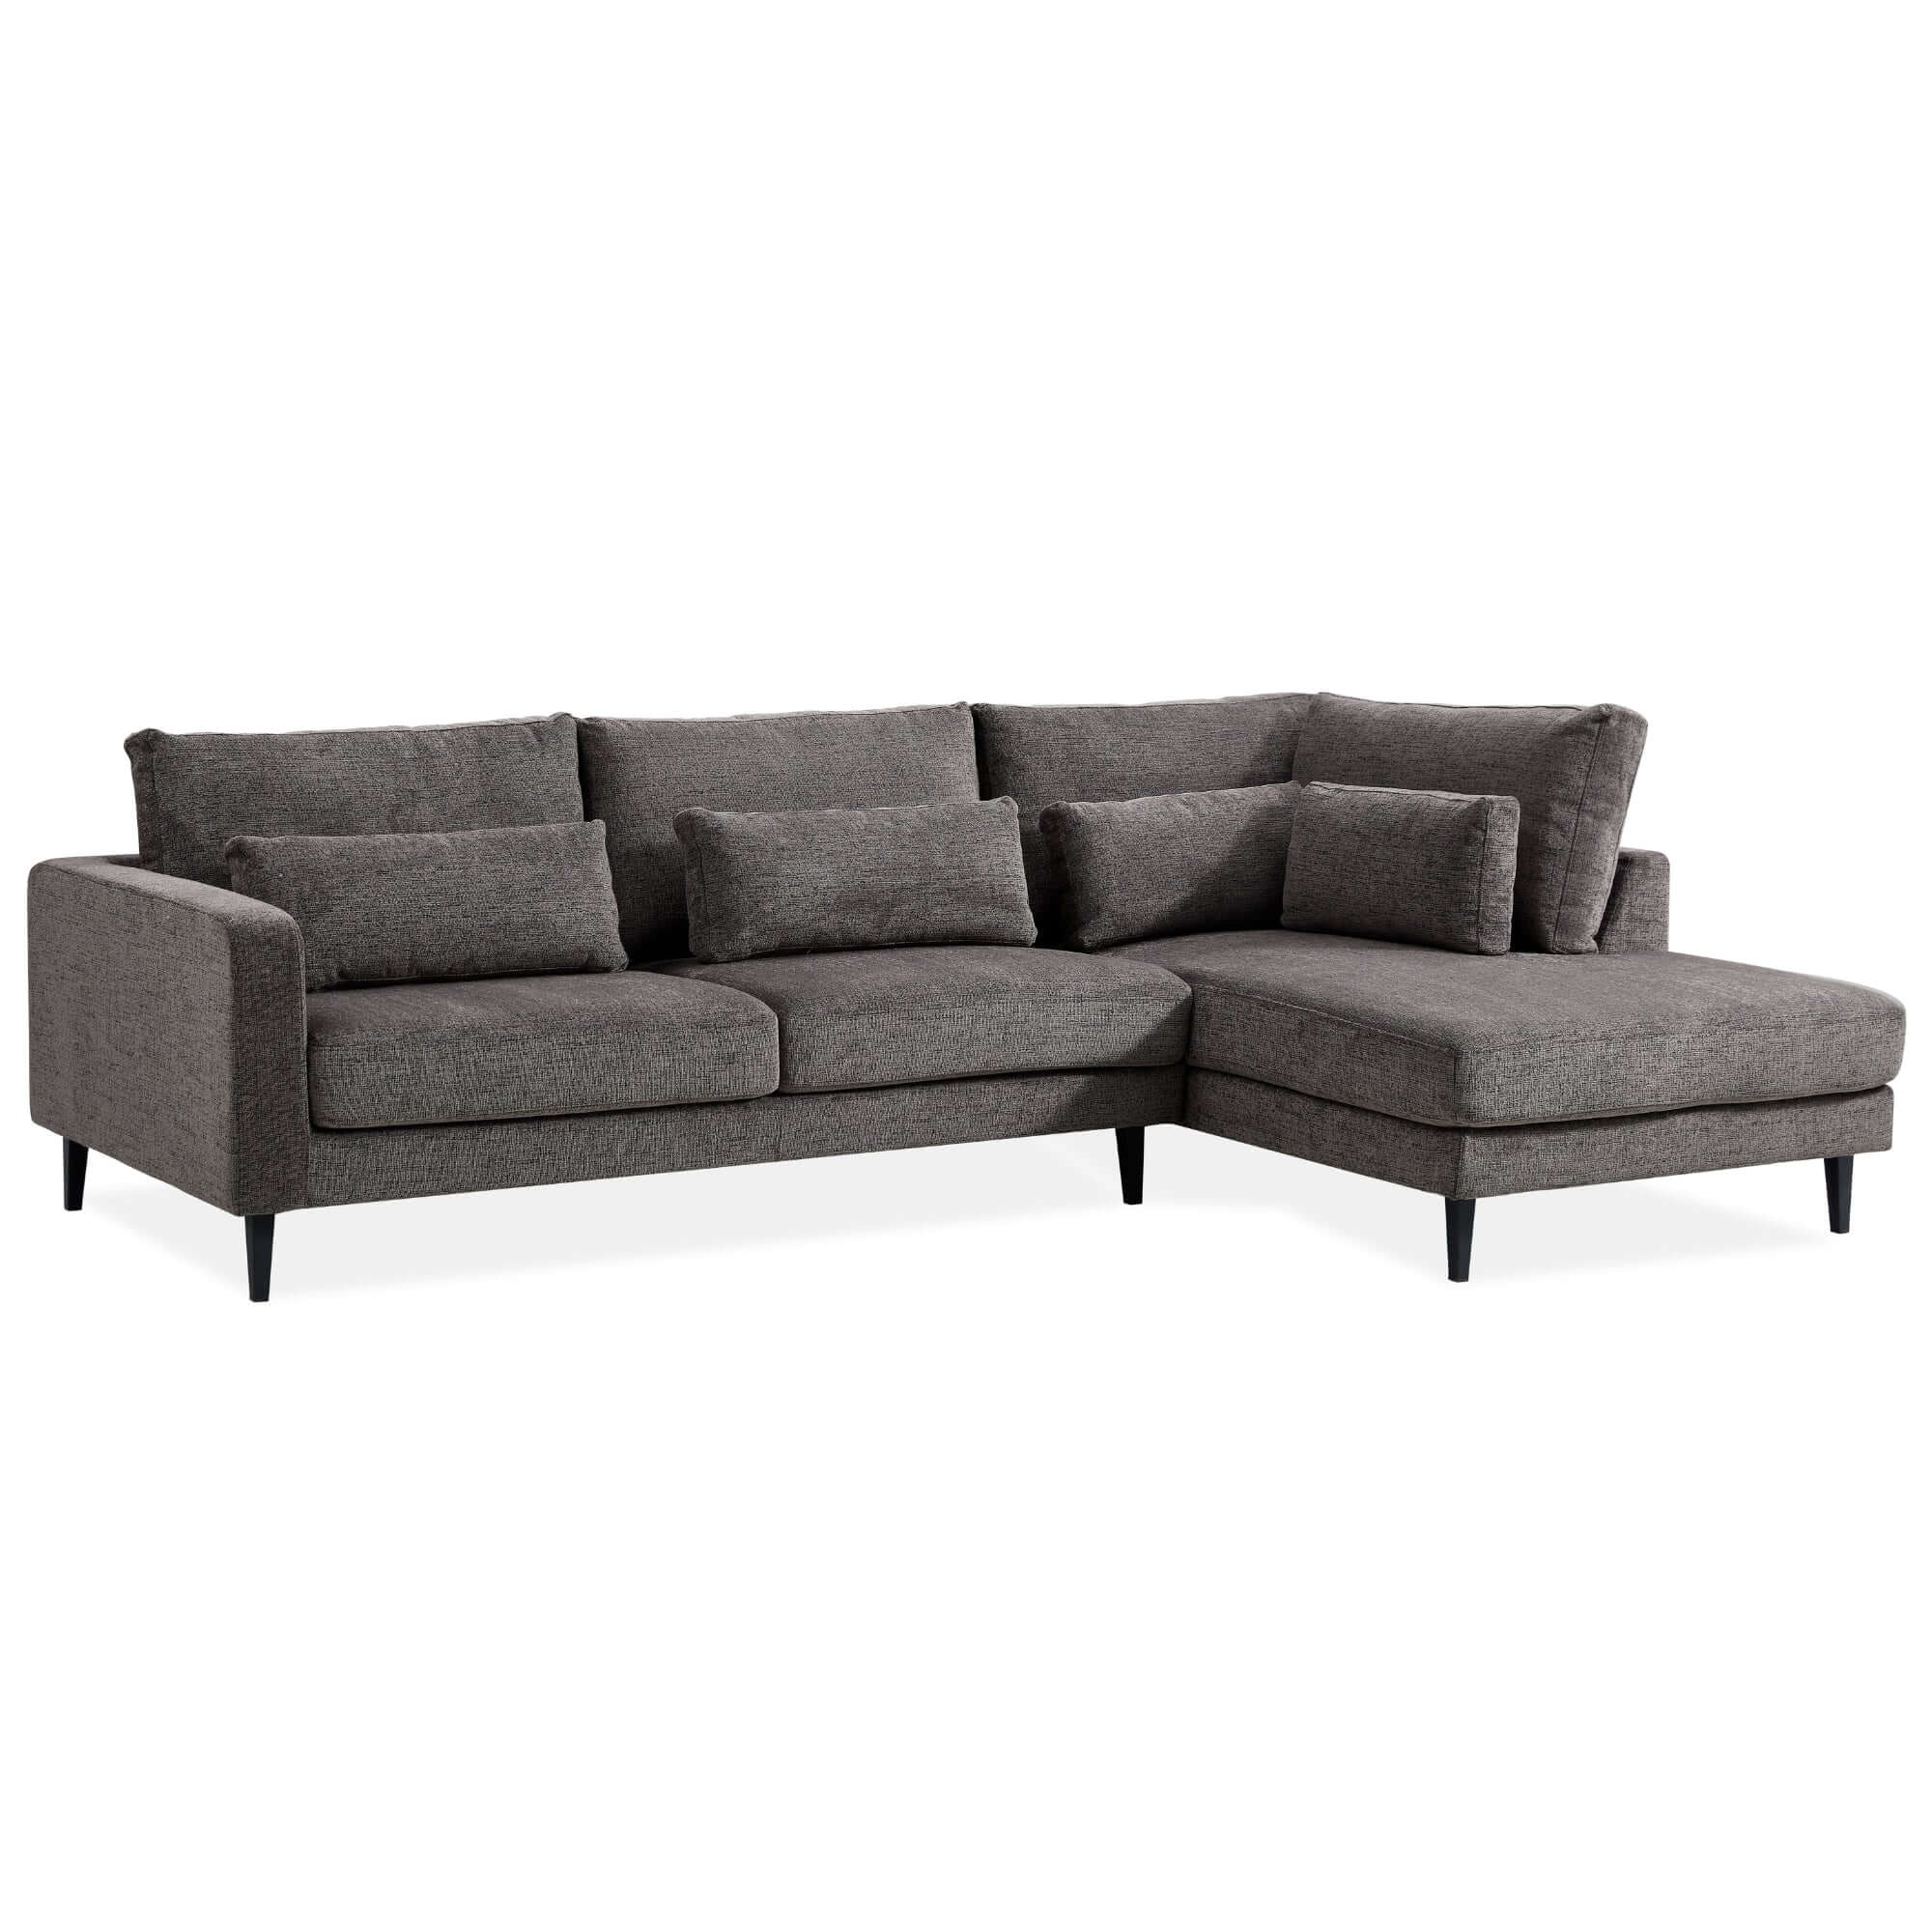 Kaylee Mink 2-Seater Sofa with Chaise Lounge-Upinteriors